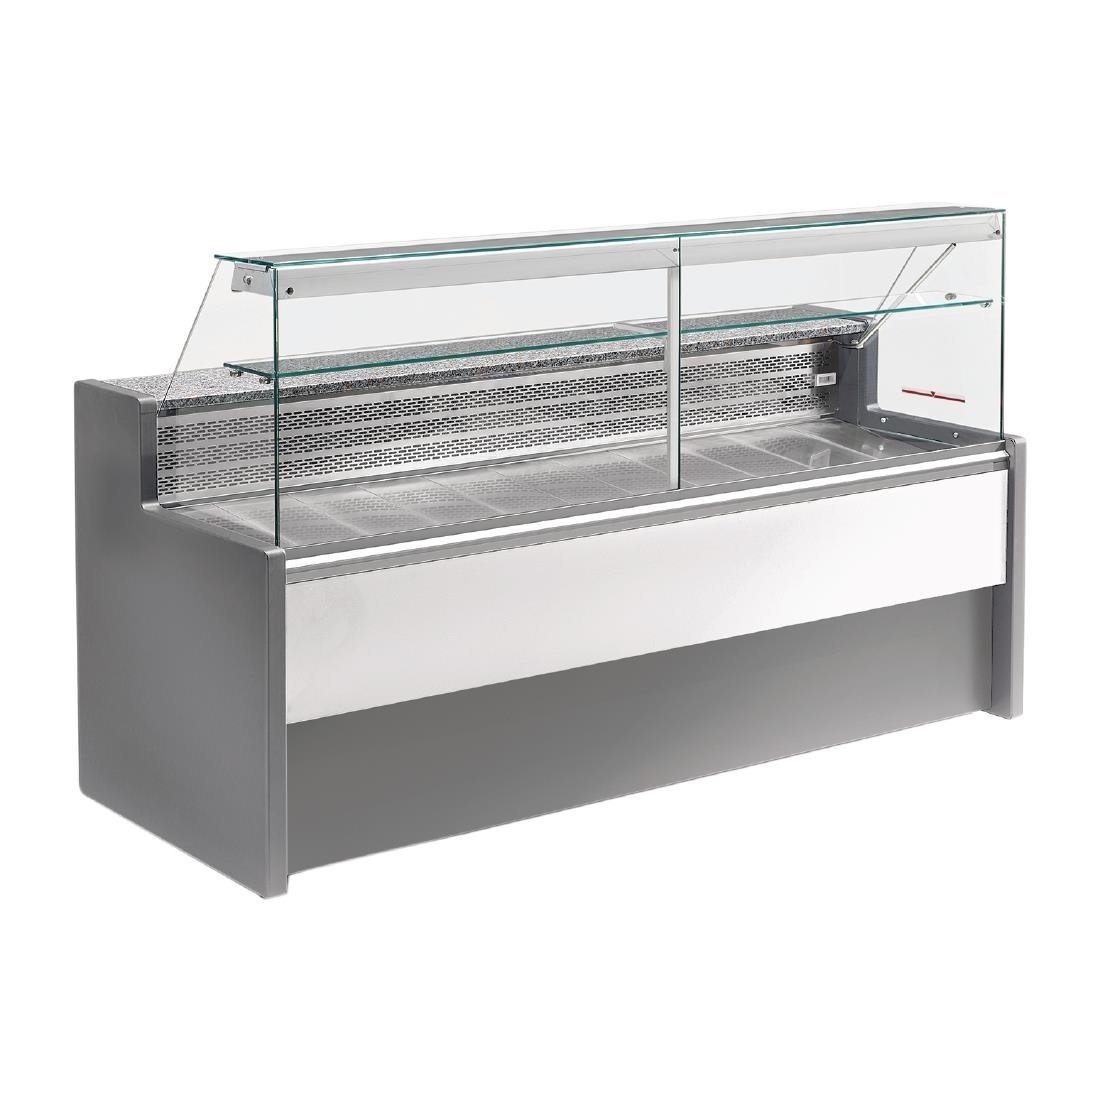 FP924-200 Zoin Tibet Serve Over Counter Grey 2000mm JD Catering Equipment Solutions Ltd